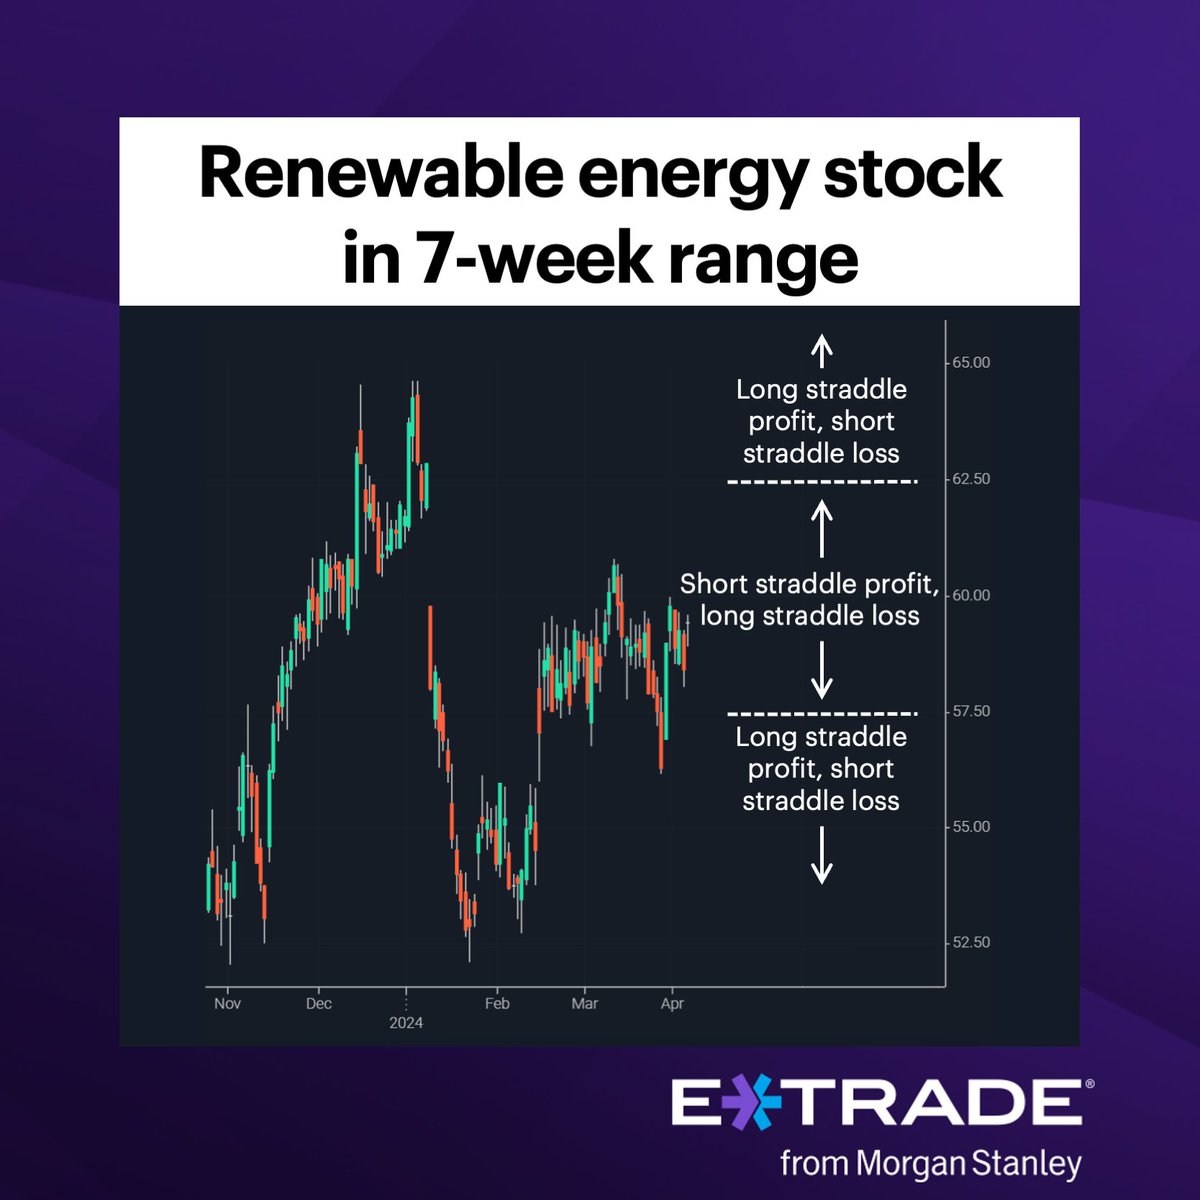 #ActiveTrader: Big options trades may highlight a large trader’s short-term outlook on this renewable energy provider. bit.ly/4cWa72G